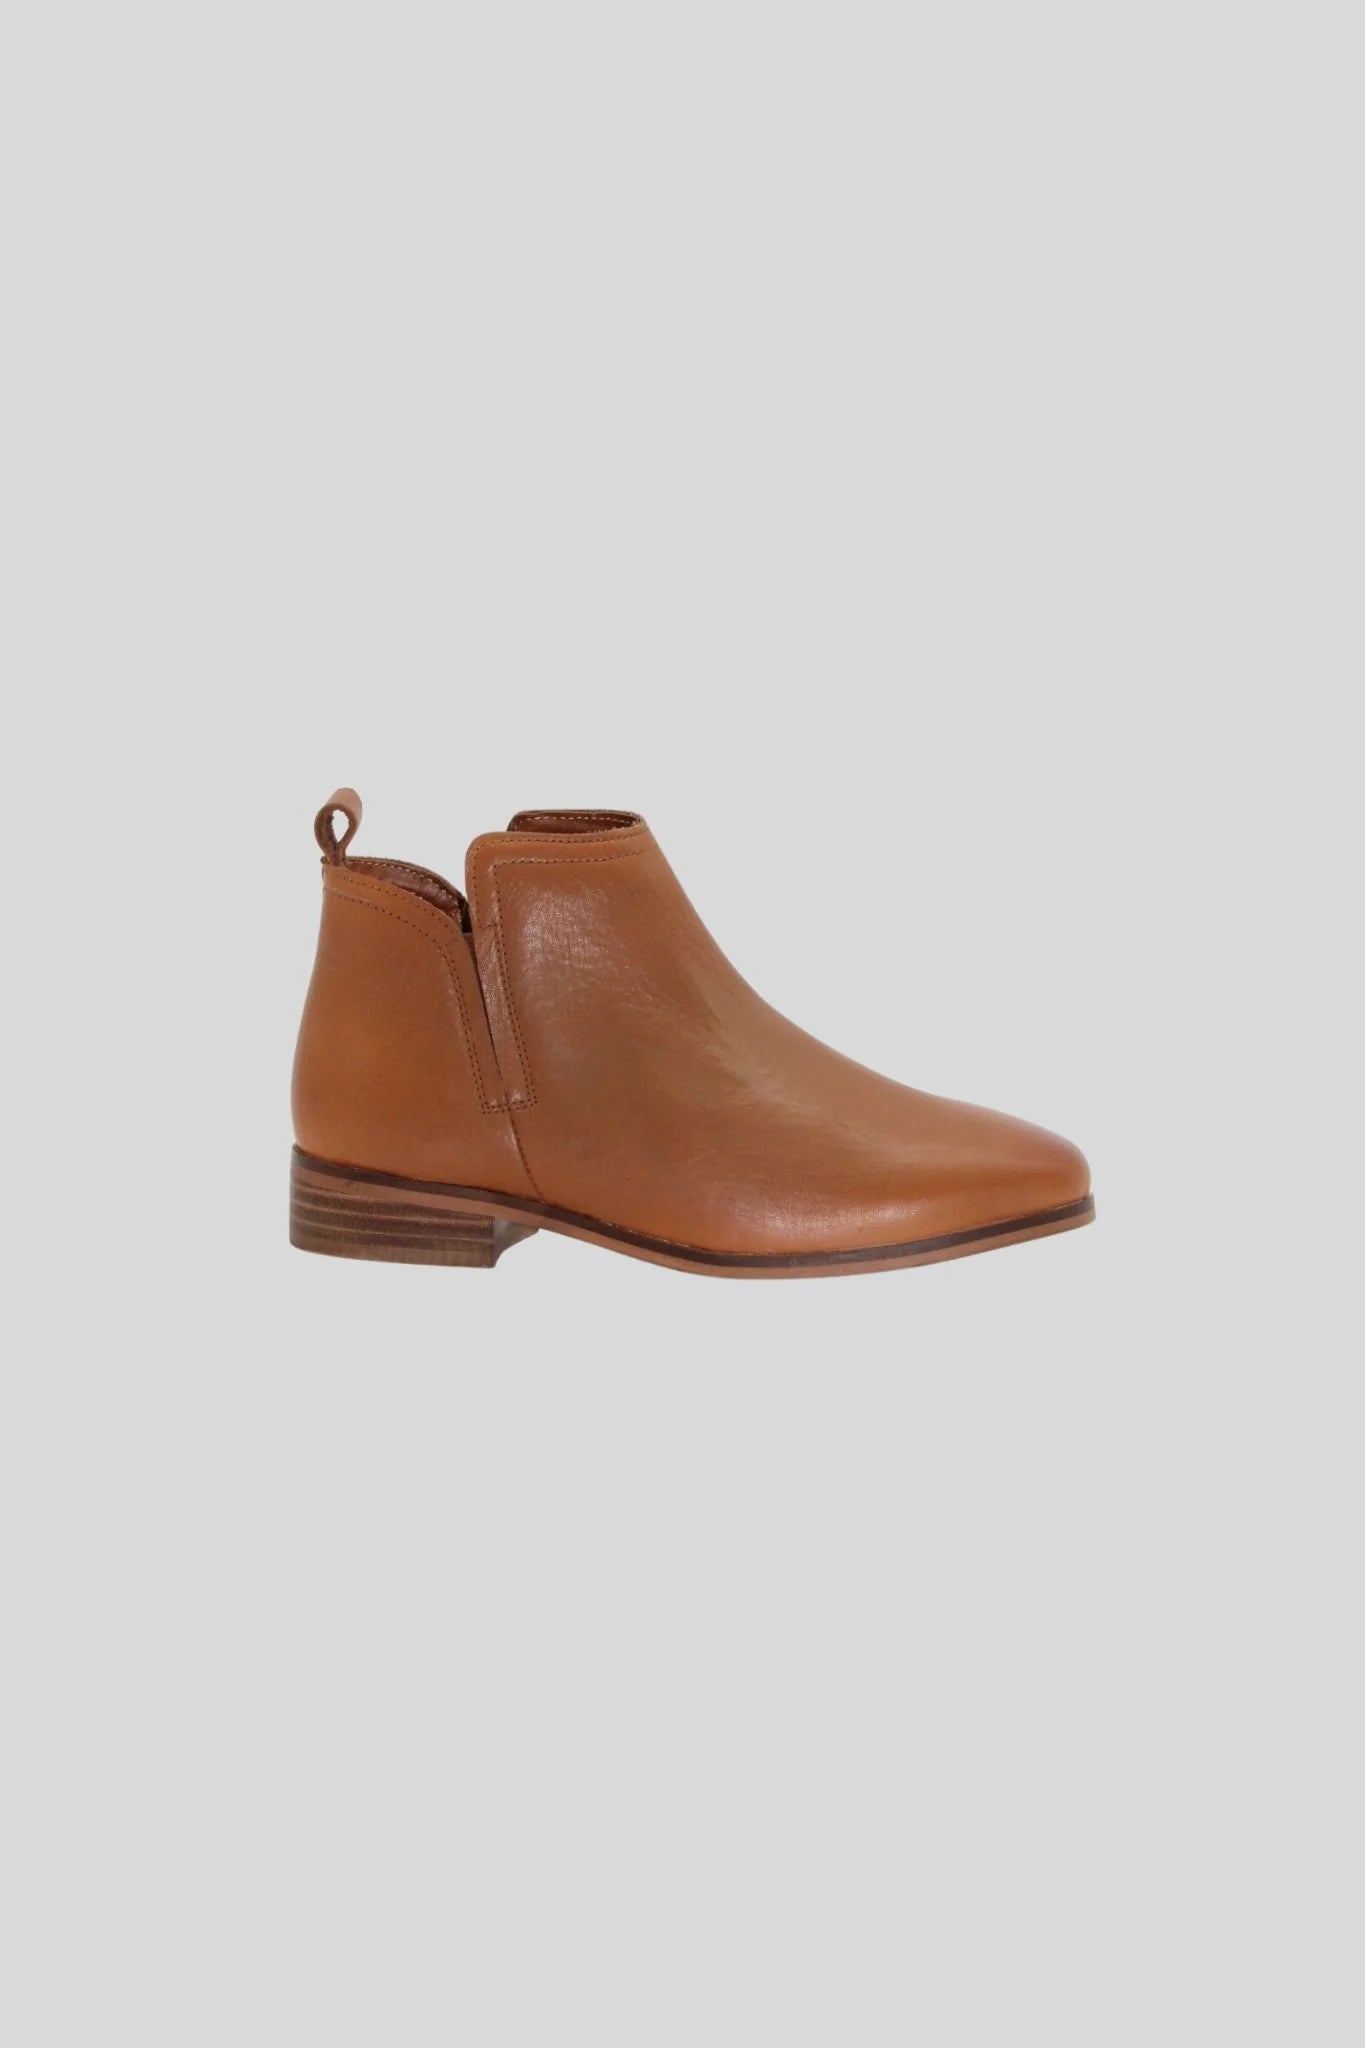 Sine Leather Boots - Tan